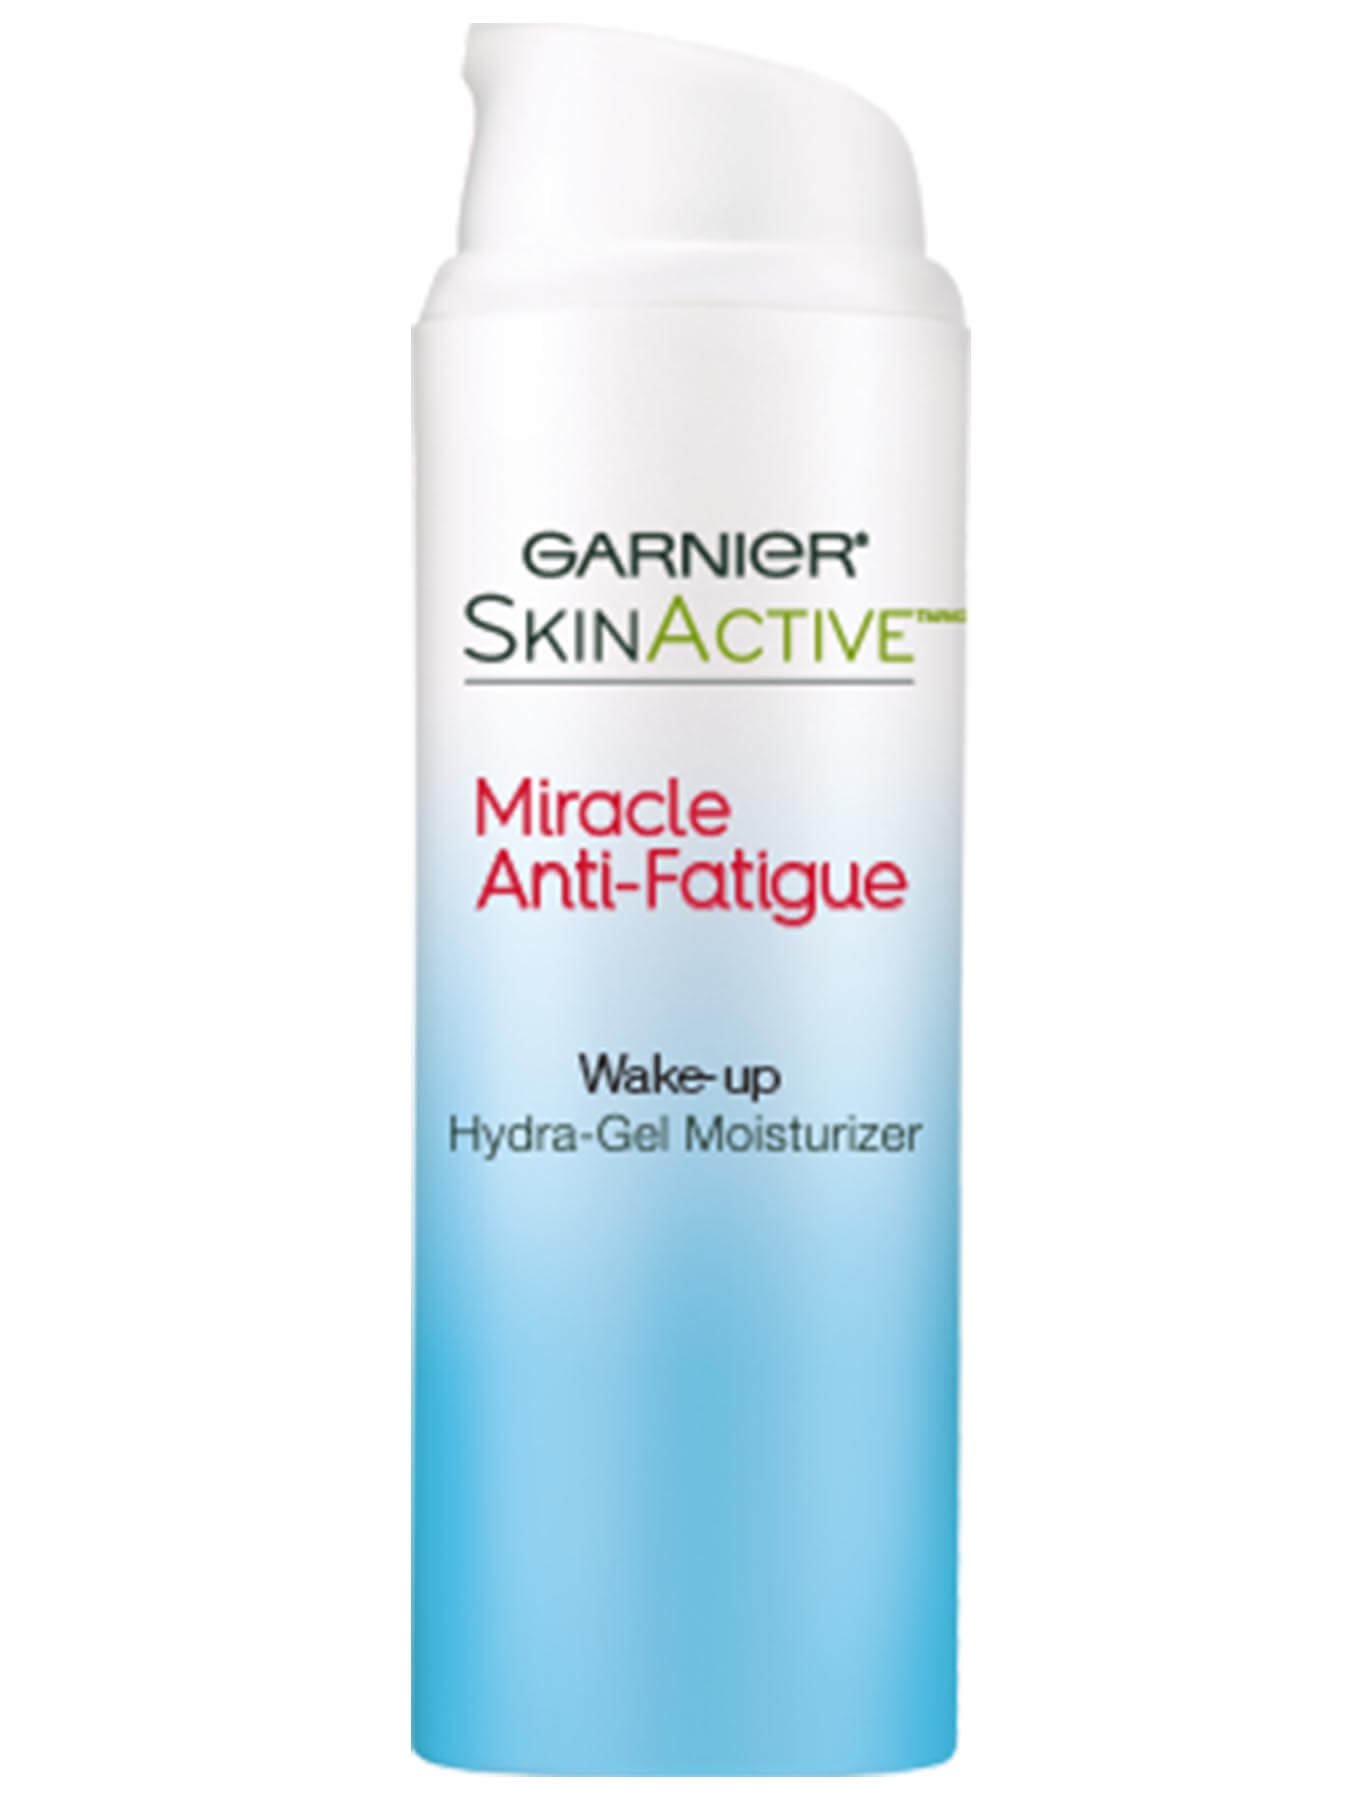 Front view of Miracle Anti-Fatigue Wake-Up Hydra-Gel Moisturizer.